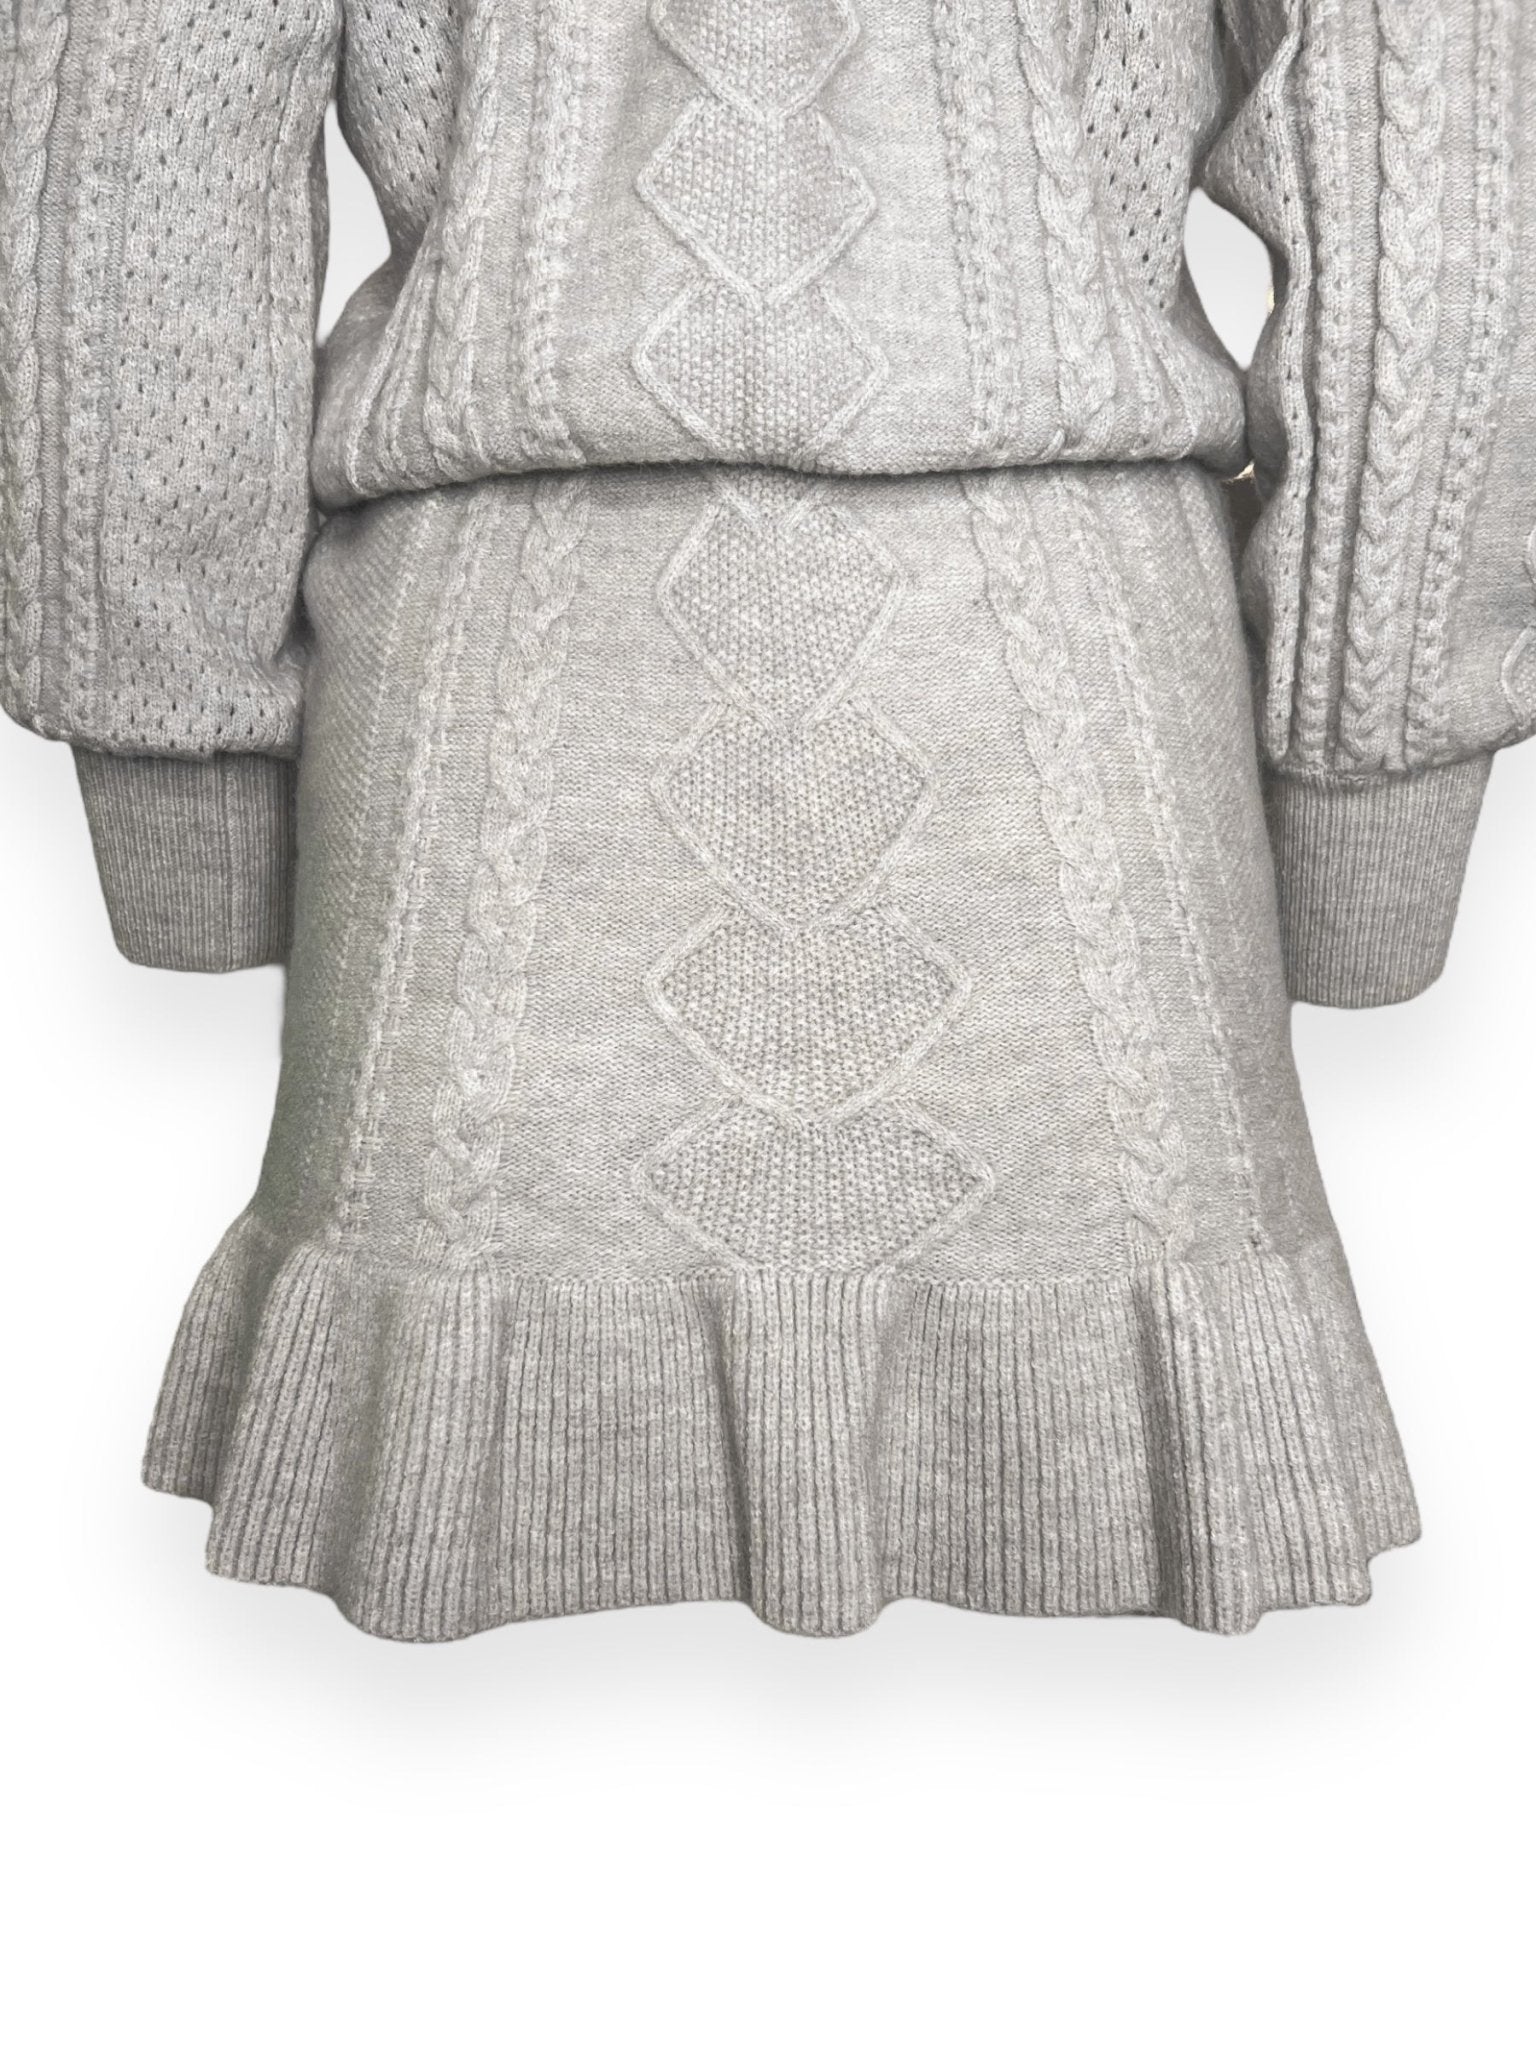 Claude Cable Knit Skirt - Frock Shop